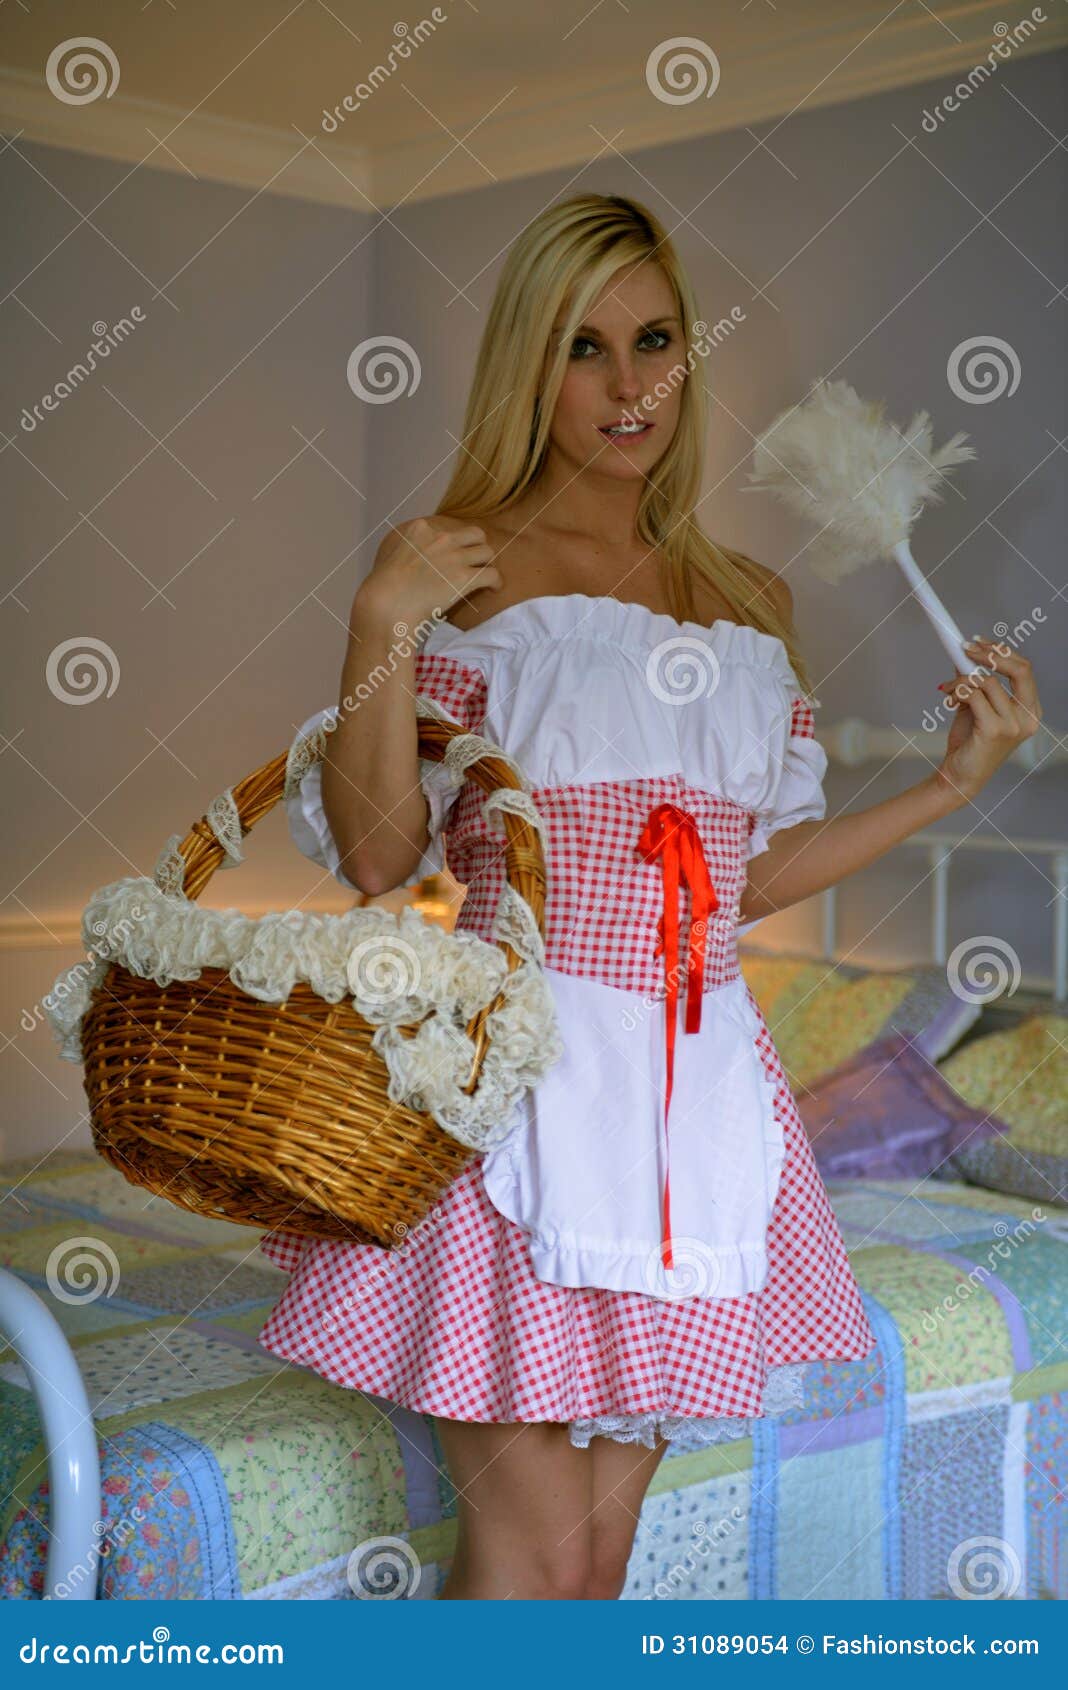 Blond girl as french maid stock photo. Image of holiday - 31089054